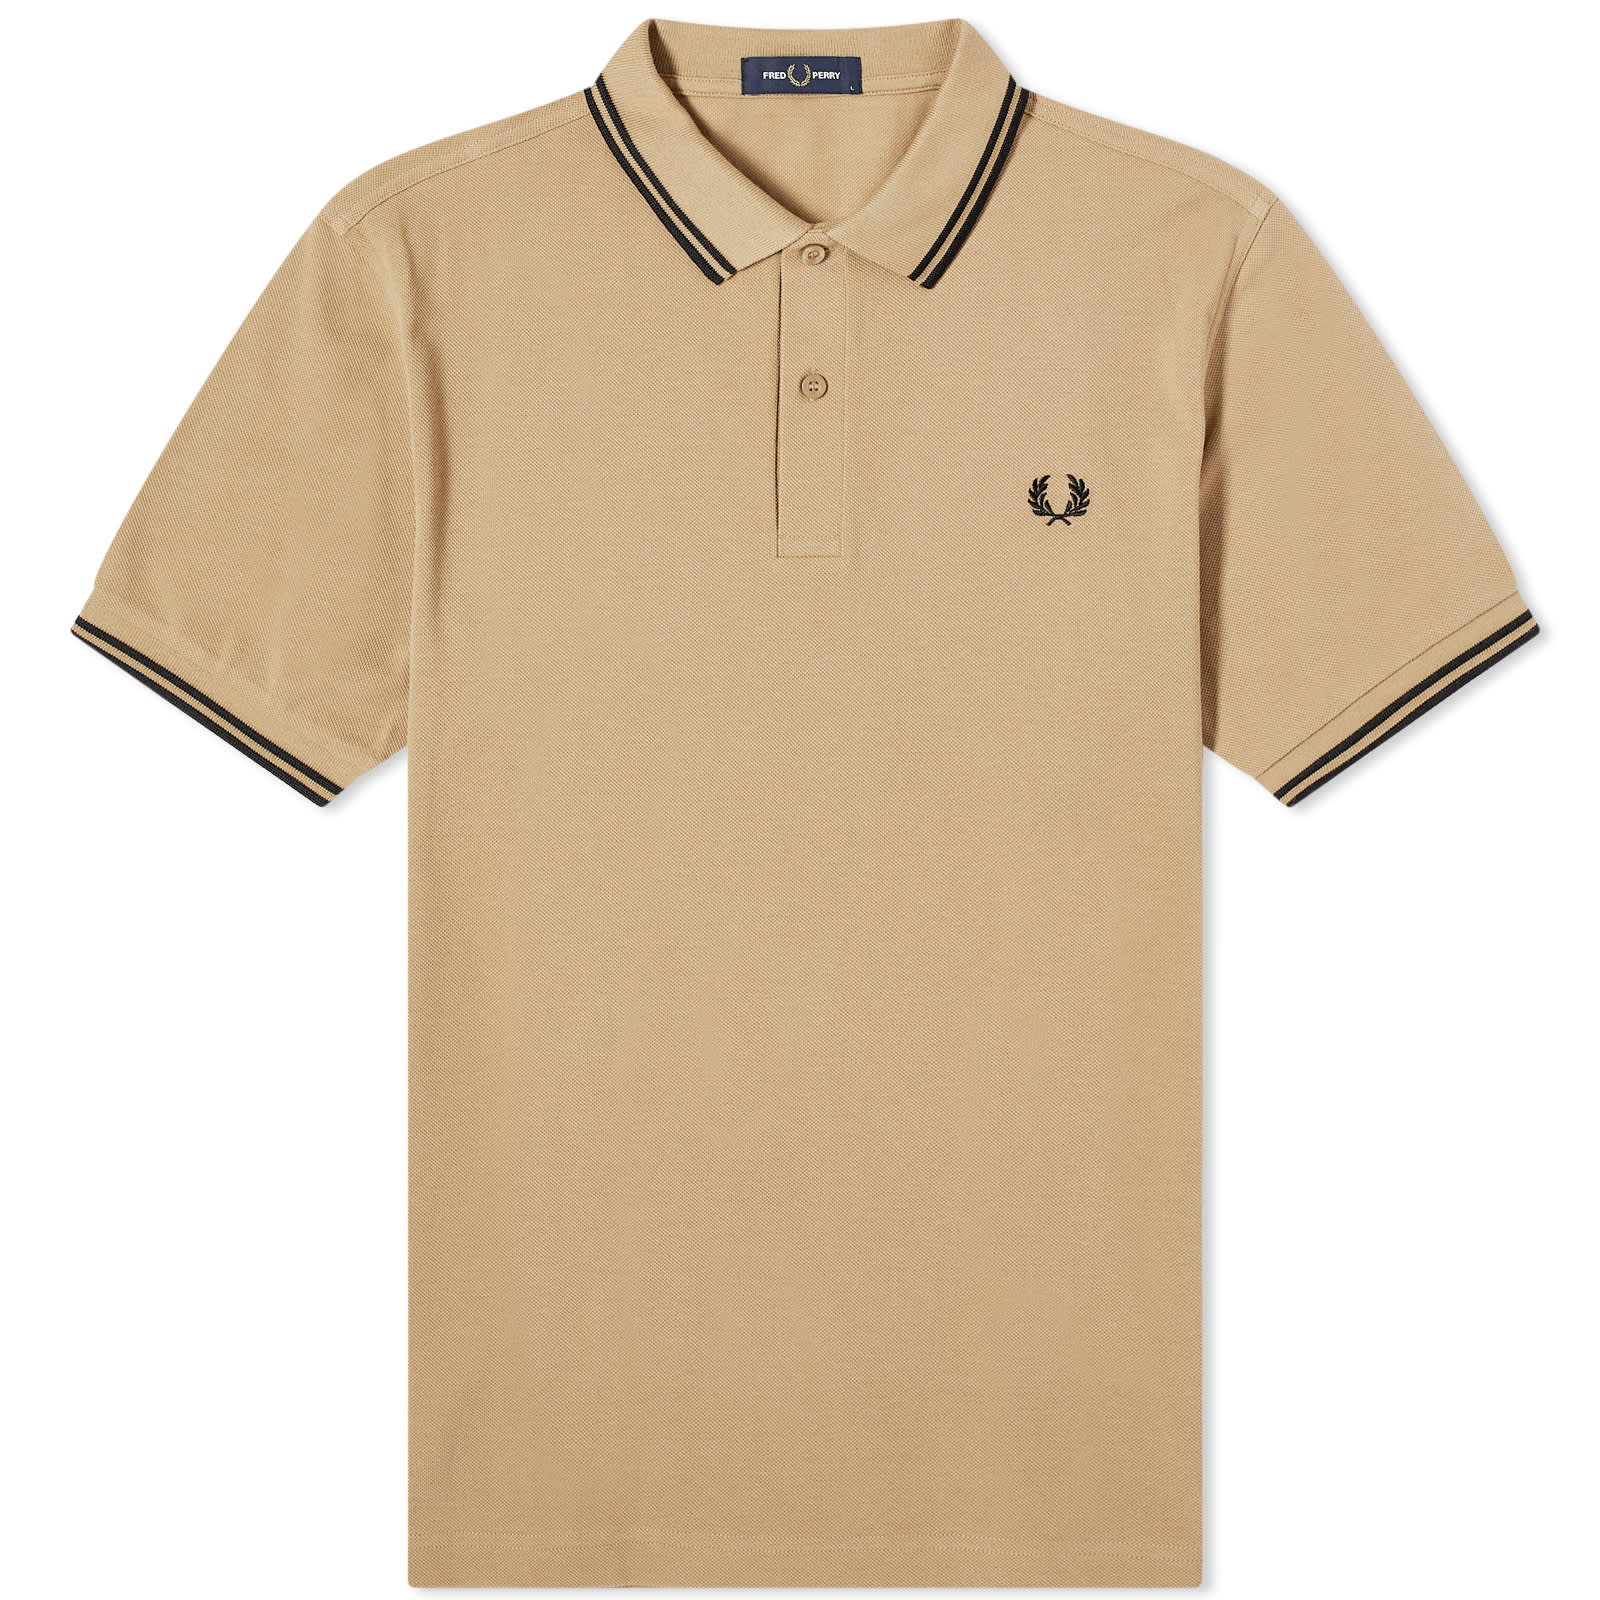 Поло Fred Perry Twin Tipped, цвет Warm Stone & Black поло fred perry twin tipped цвет french navy